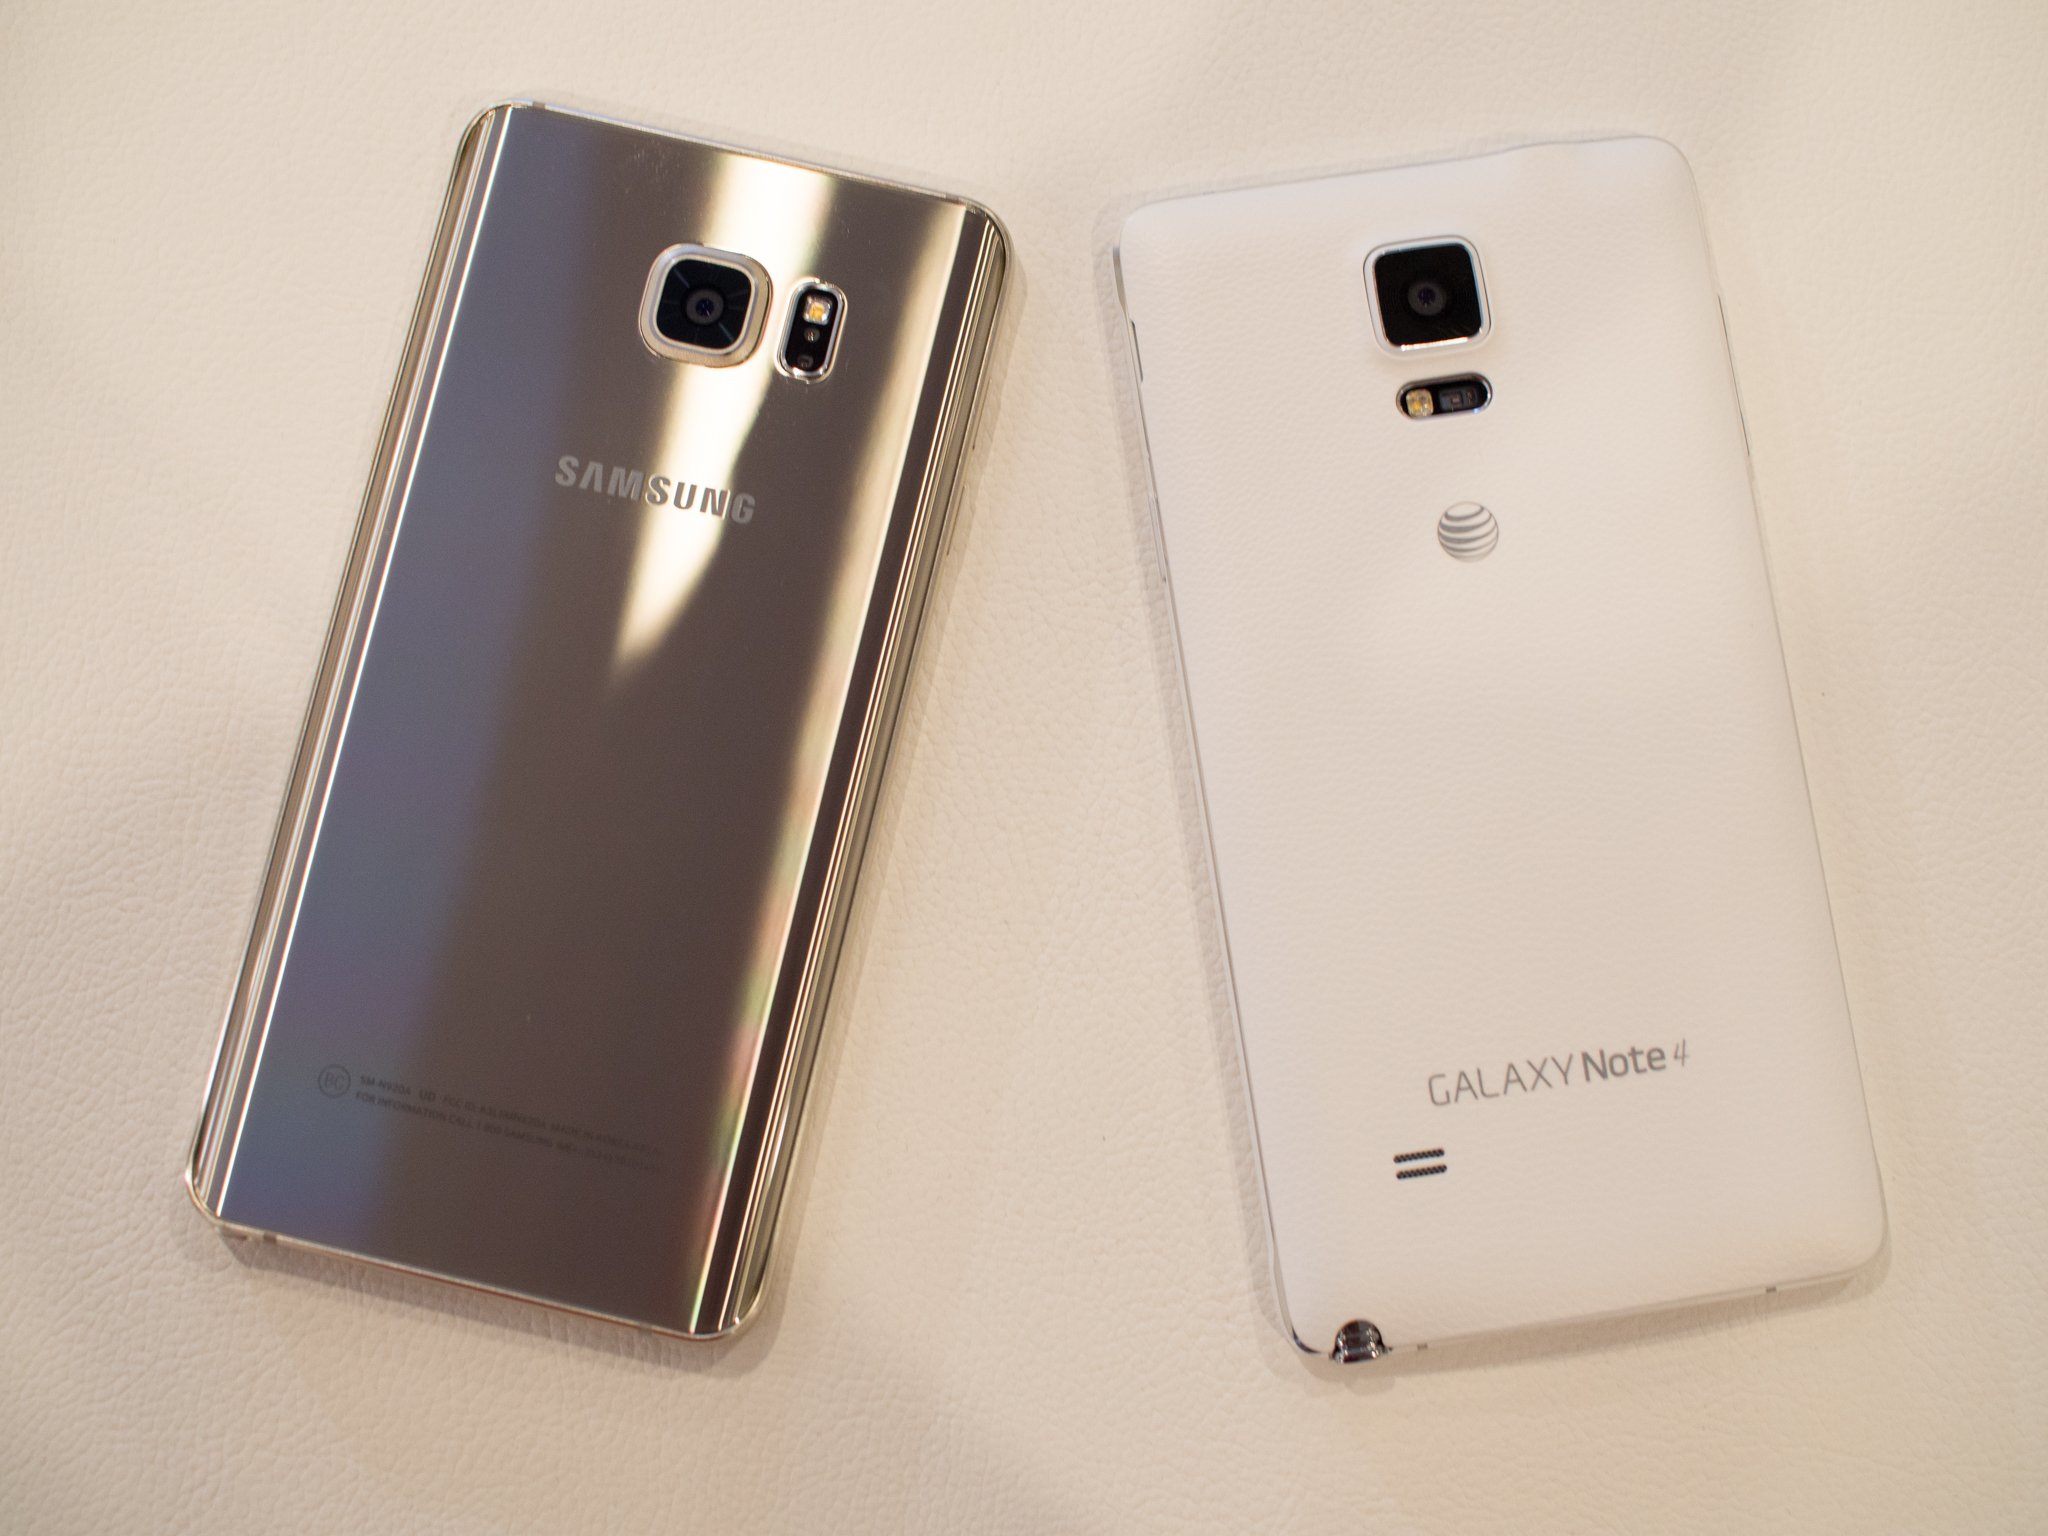 Samsung Galaxy Note 5 and note 4